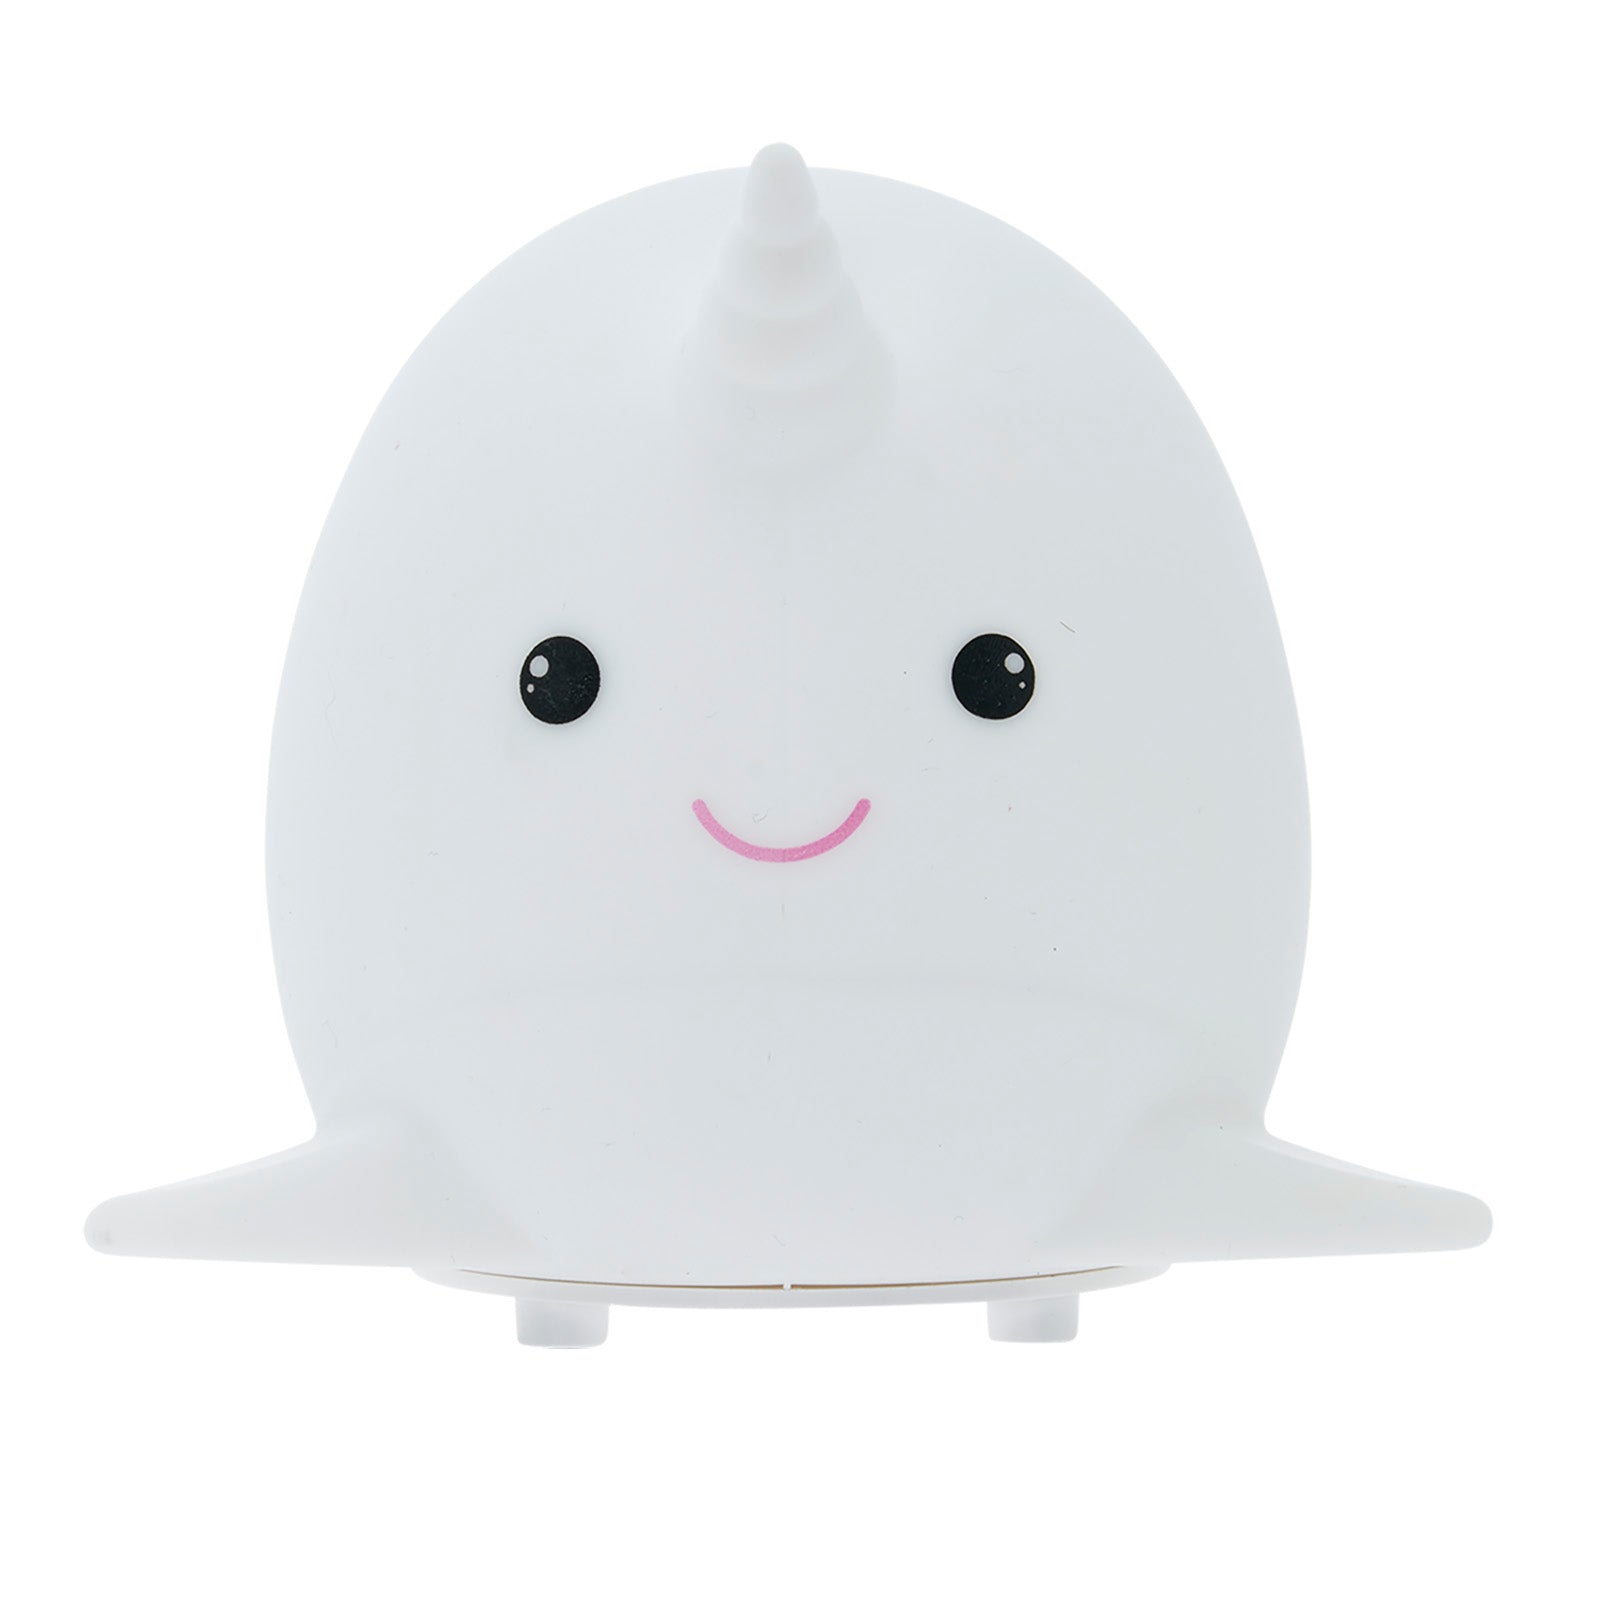 LitezAll Narwhal Squishable Color Change Silicone Light